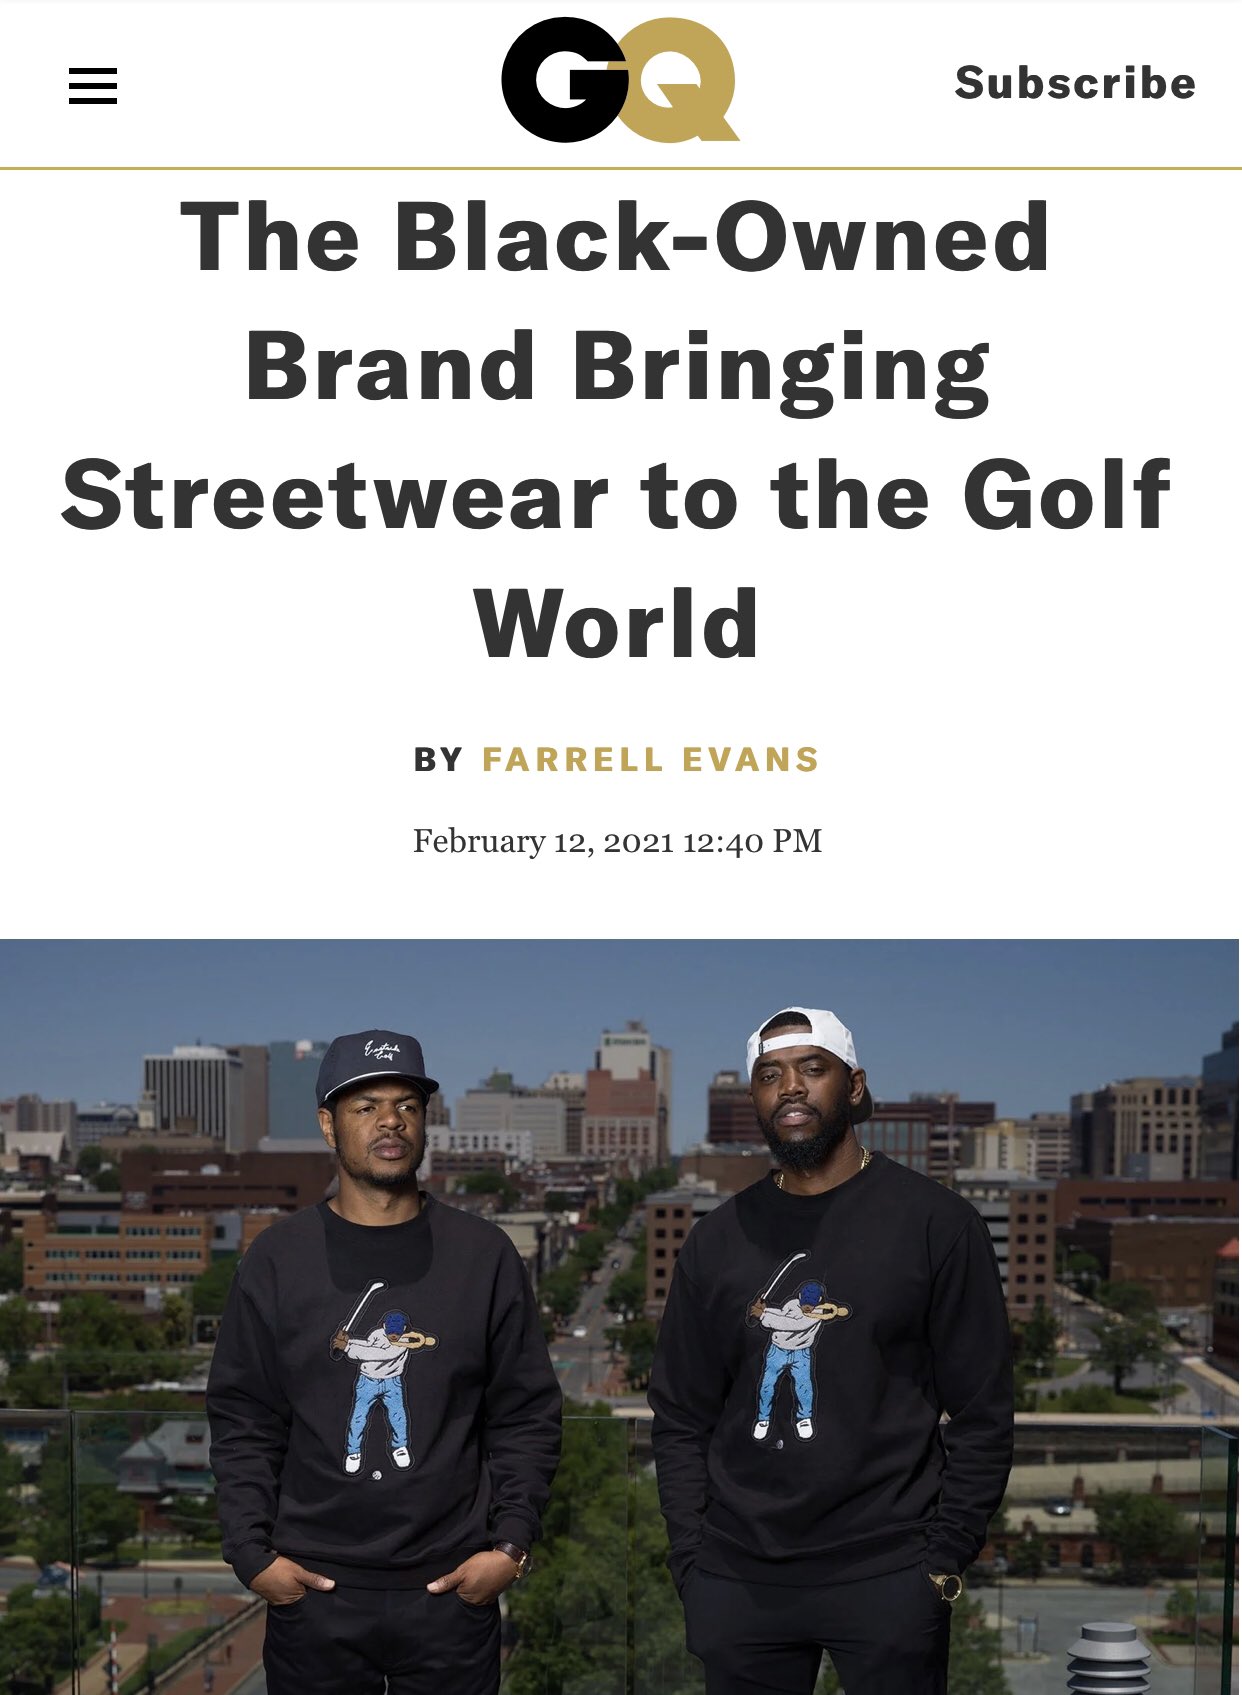 The Black-Owned Brand Bringing Streetwear to the Golf World